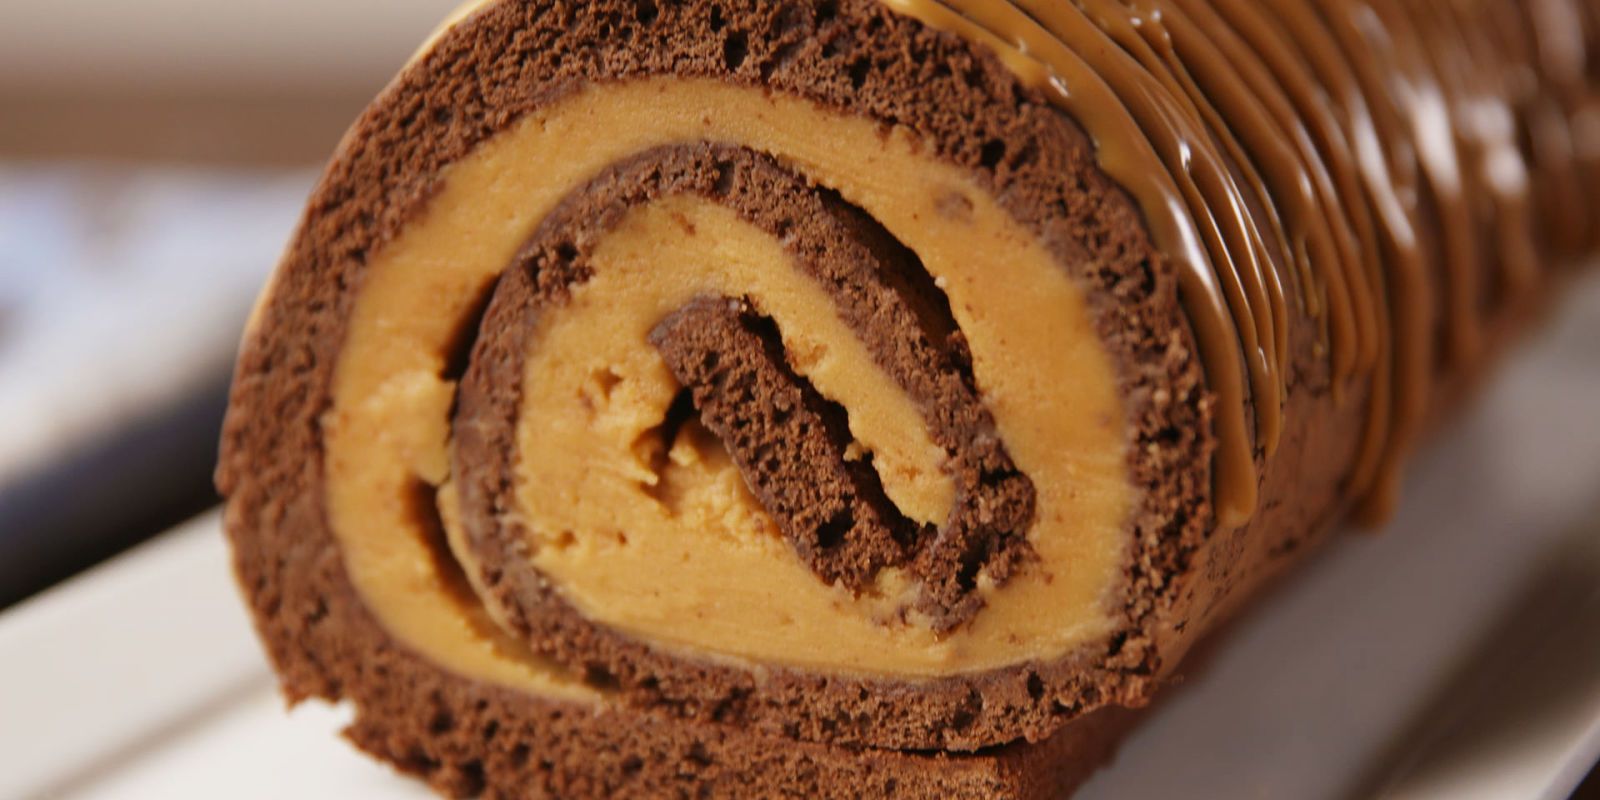 Chocolate Roll Cake With Peanut Butter Buttercream Frosting Recipe -  Tablespoon.com